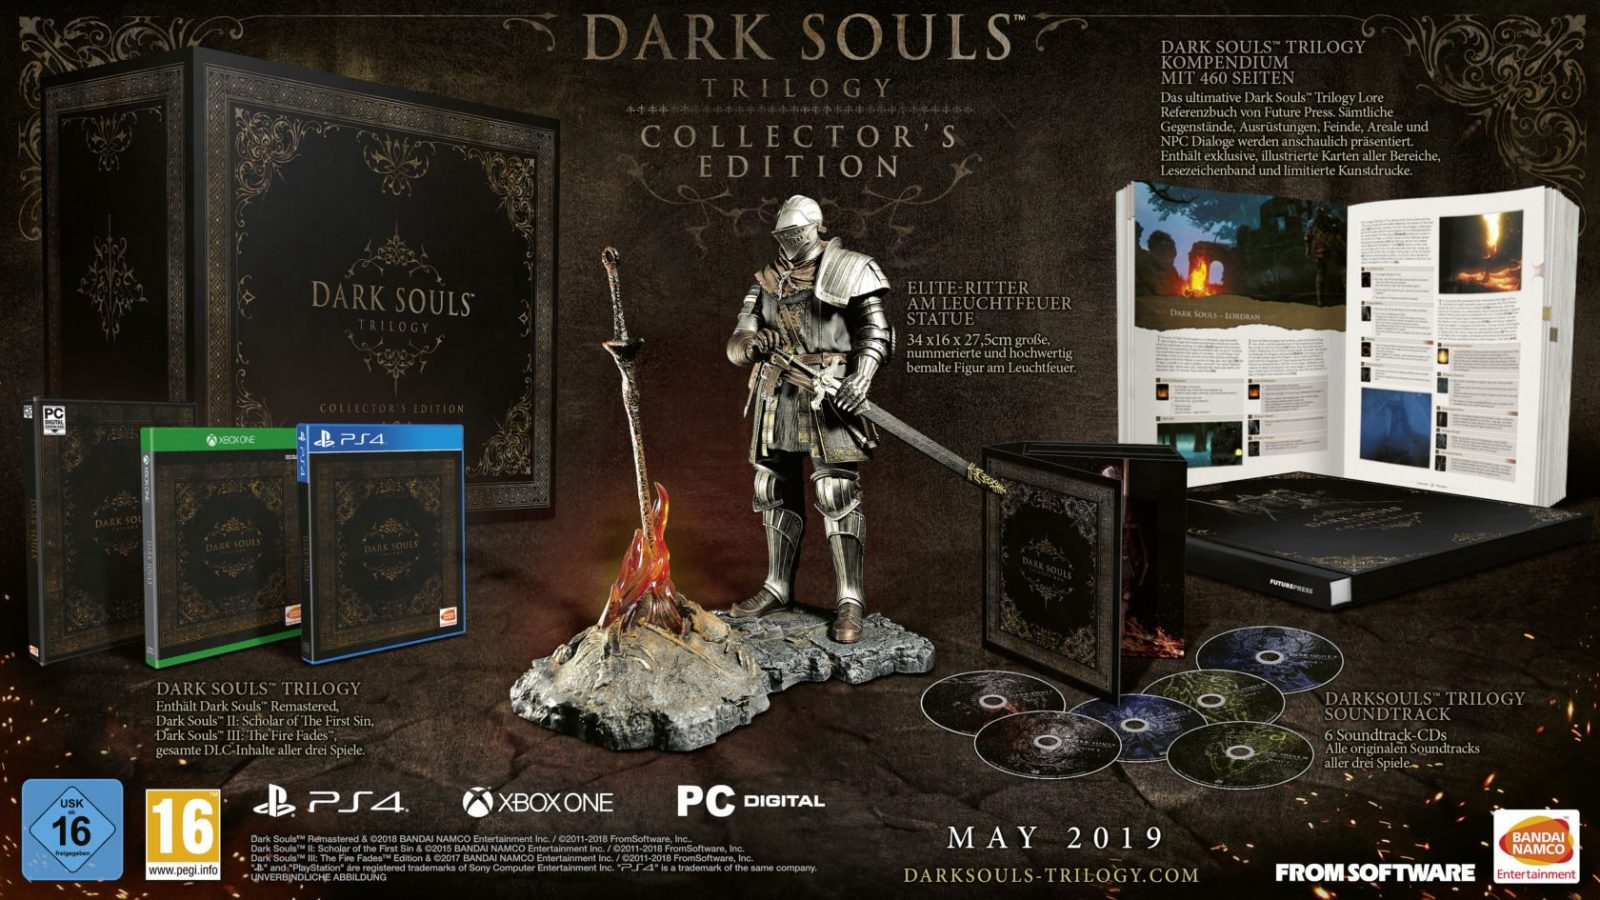 DARK SOULS™: TRILOGY Collector‘s Edition